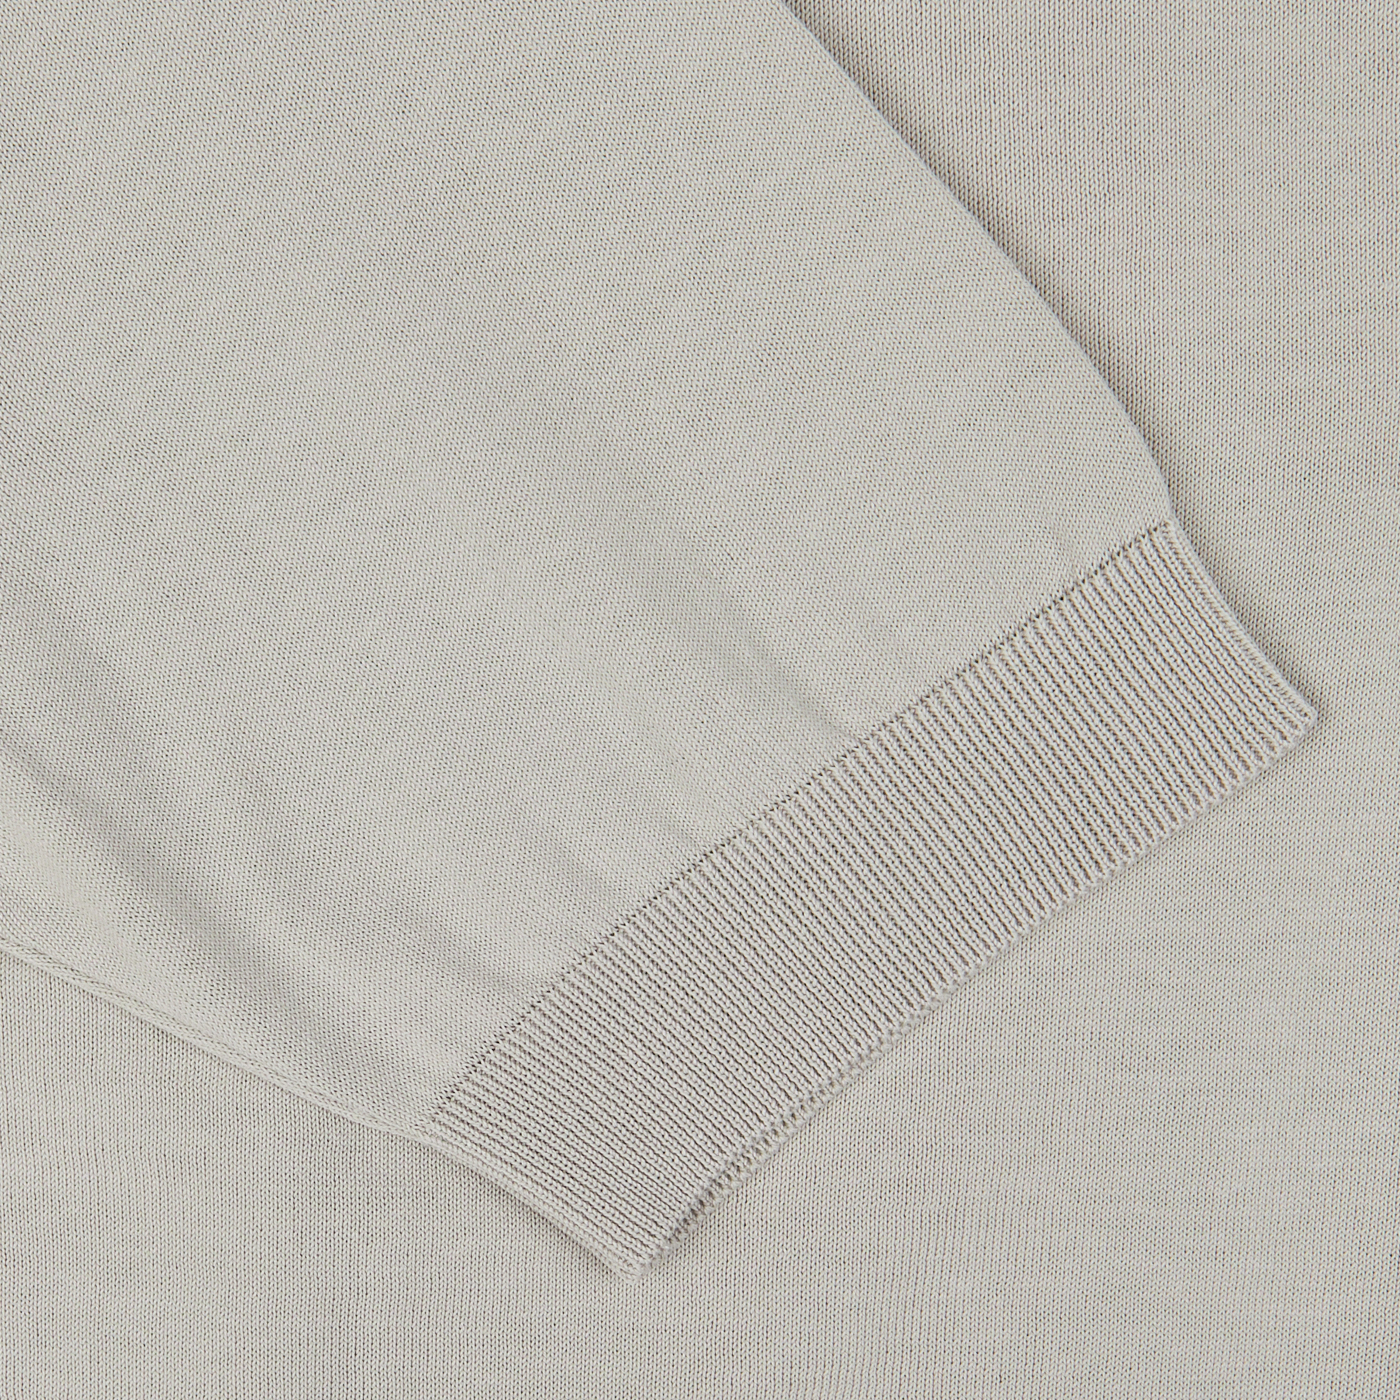 Close-up of a Nebbia Grey Crepe Cotton Polo Shirt with a ribbed cuff detail, made in Italy by Filippo de Laurentiis.